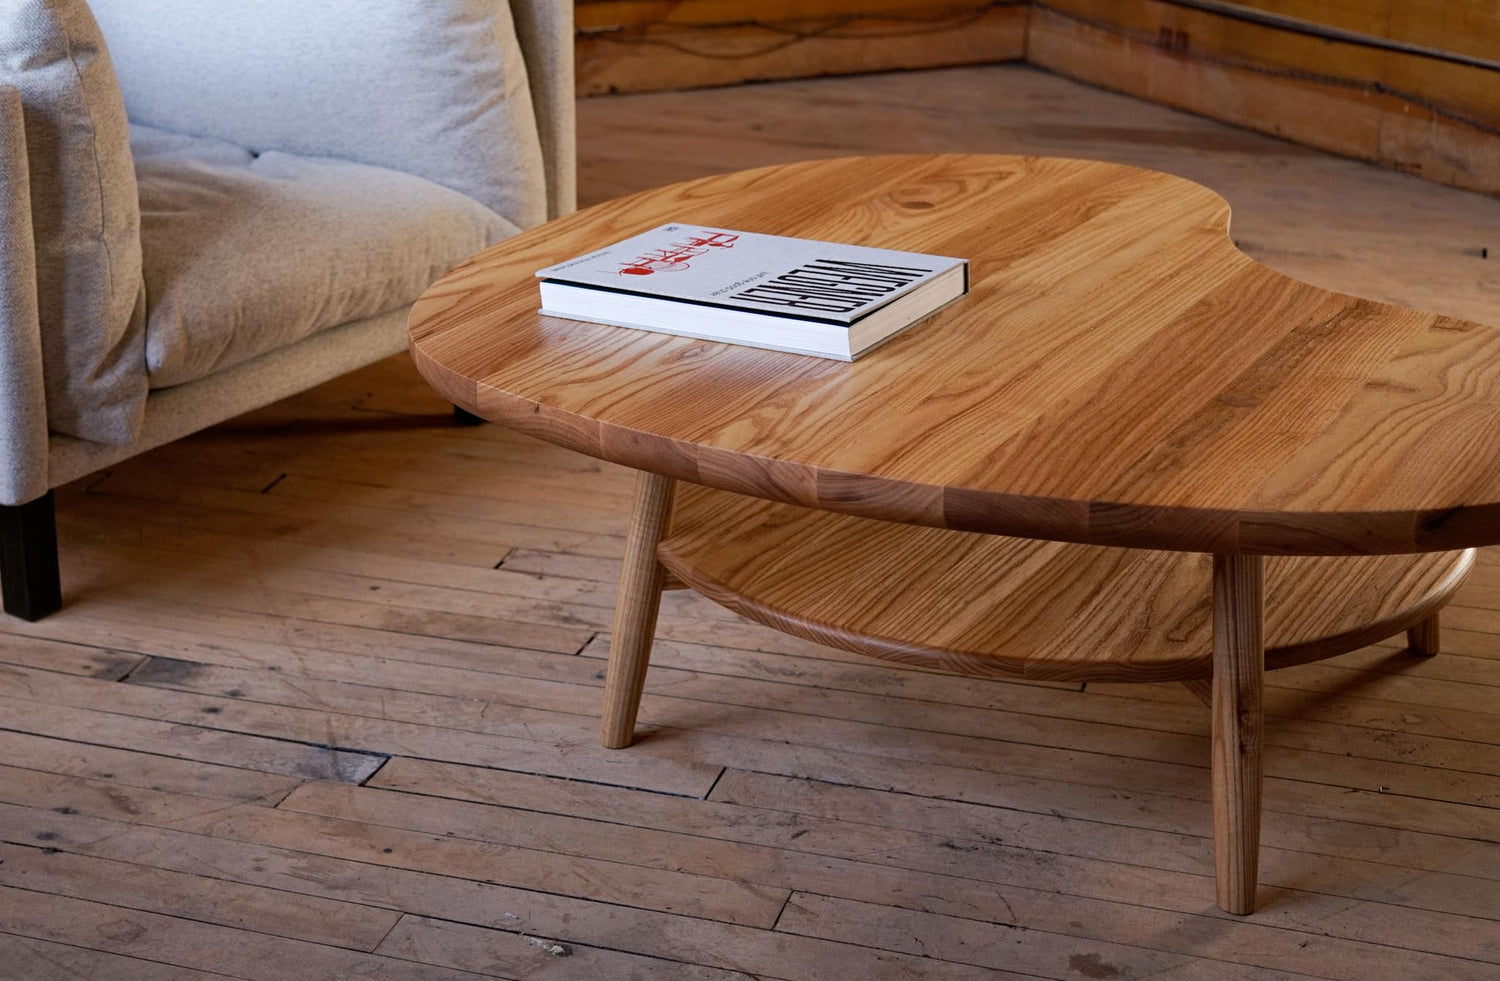 An organic shaped hardwood coffee table with a design book on top.